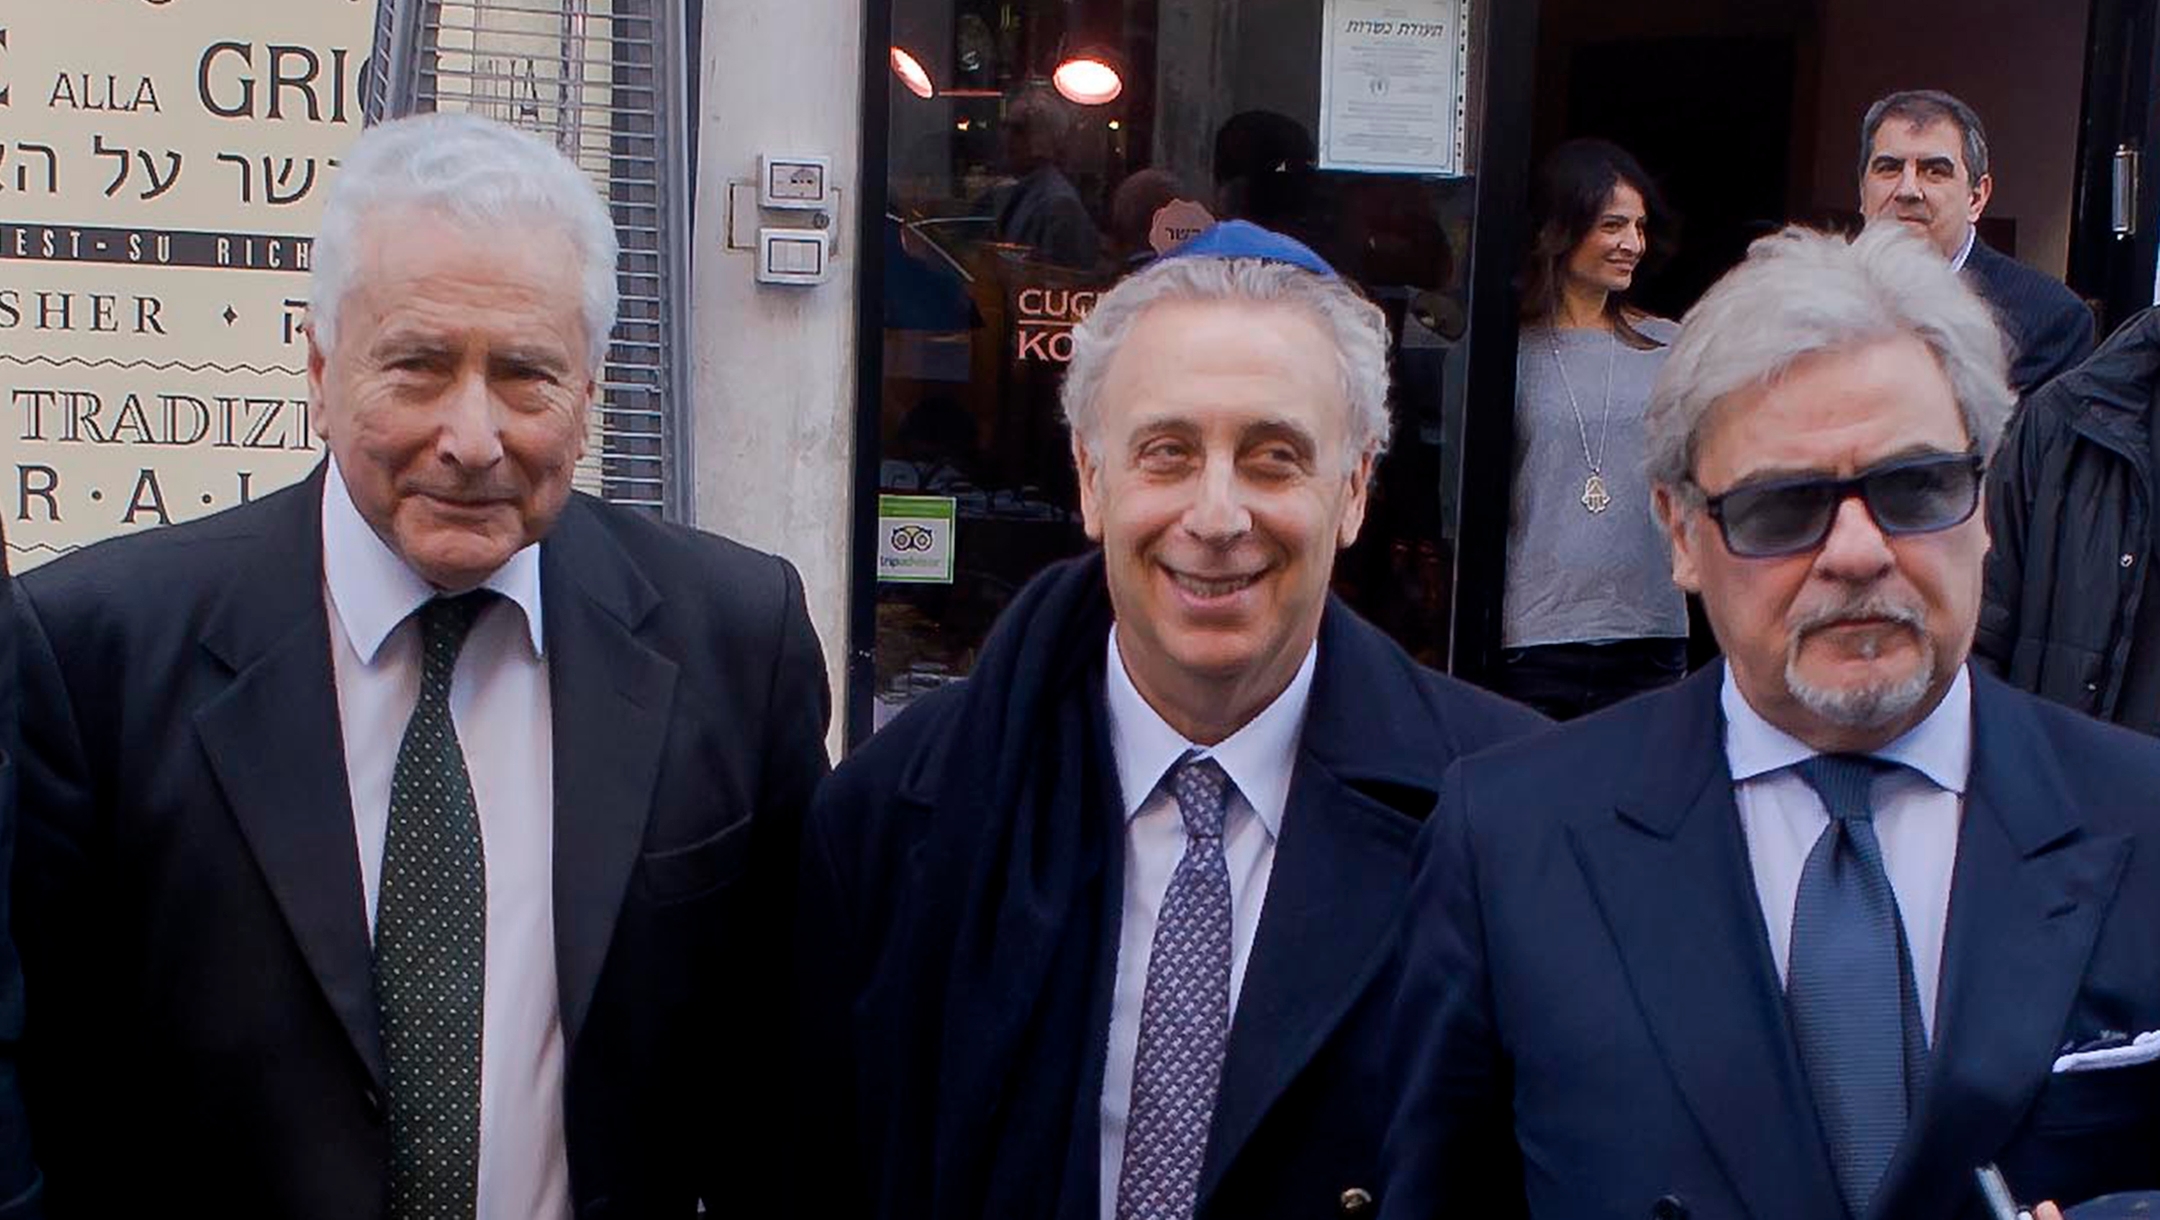 Renzo Gattegna, left, stands outside a kosher restaurant in Rome, Italy on March 9, 2015. (Stefano Montesi - Corbis/Getty Images)